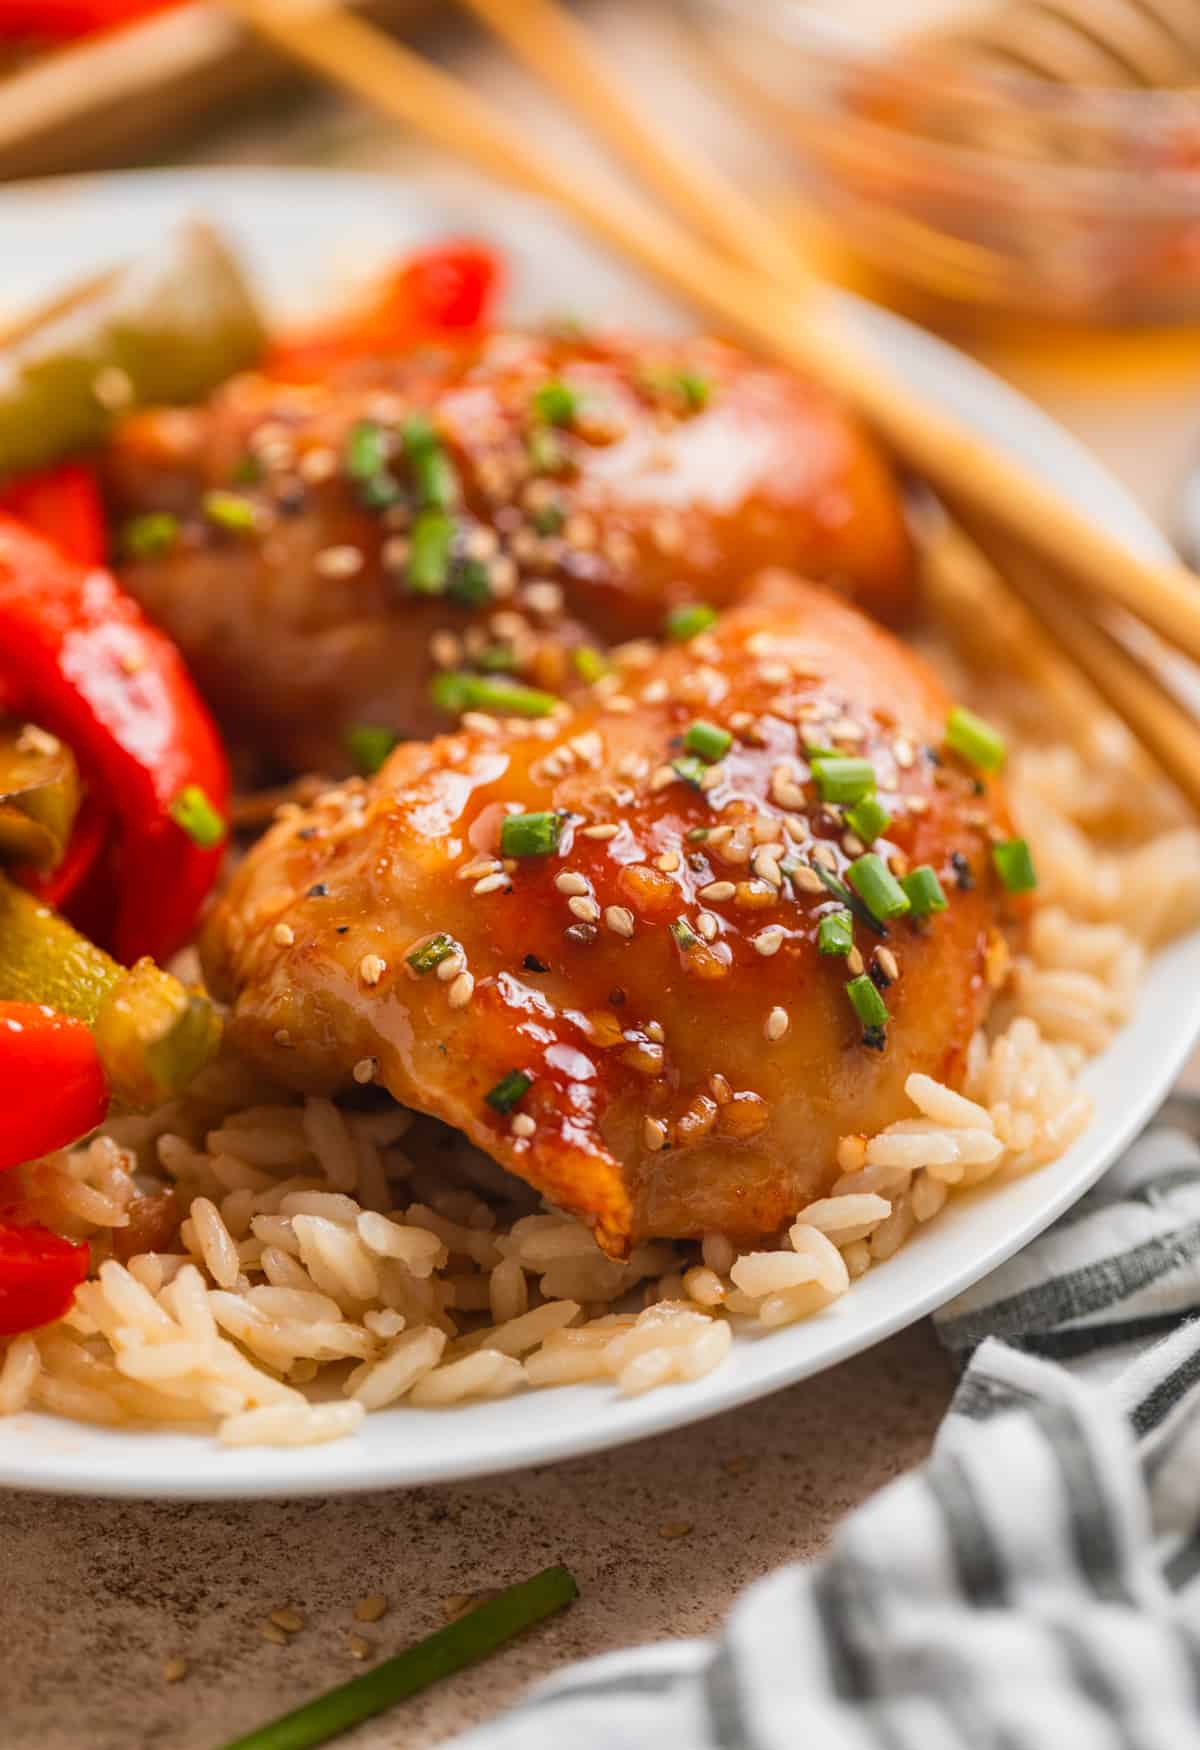 Honey garlic chicken thighs with peppers over rice on white plate.